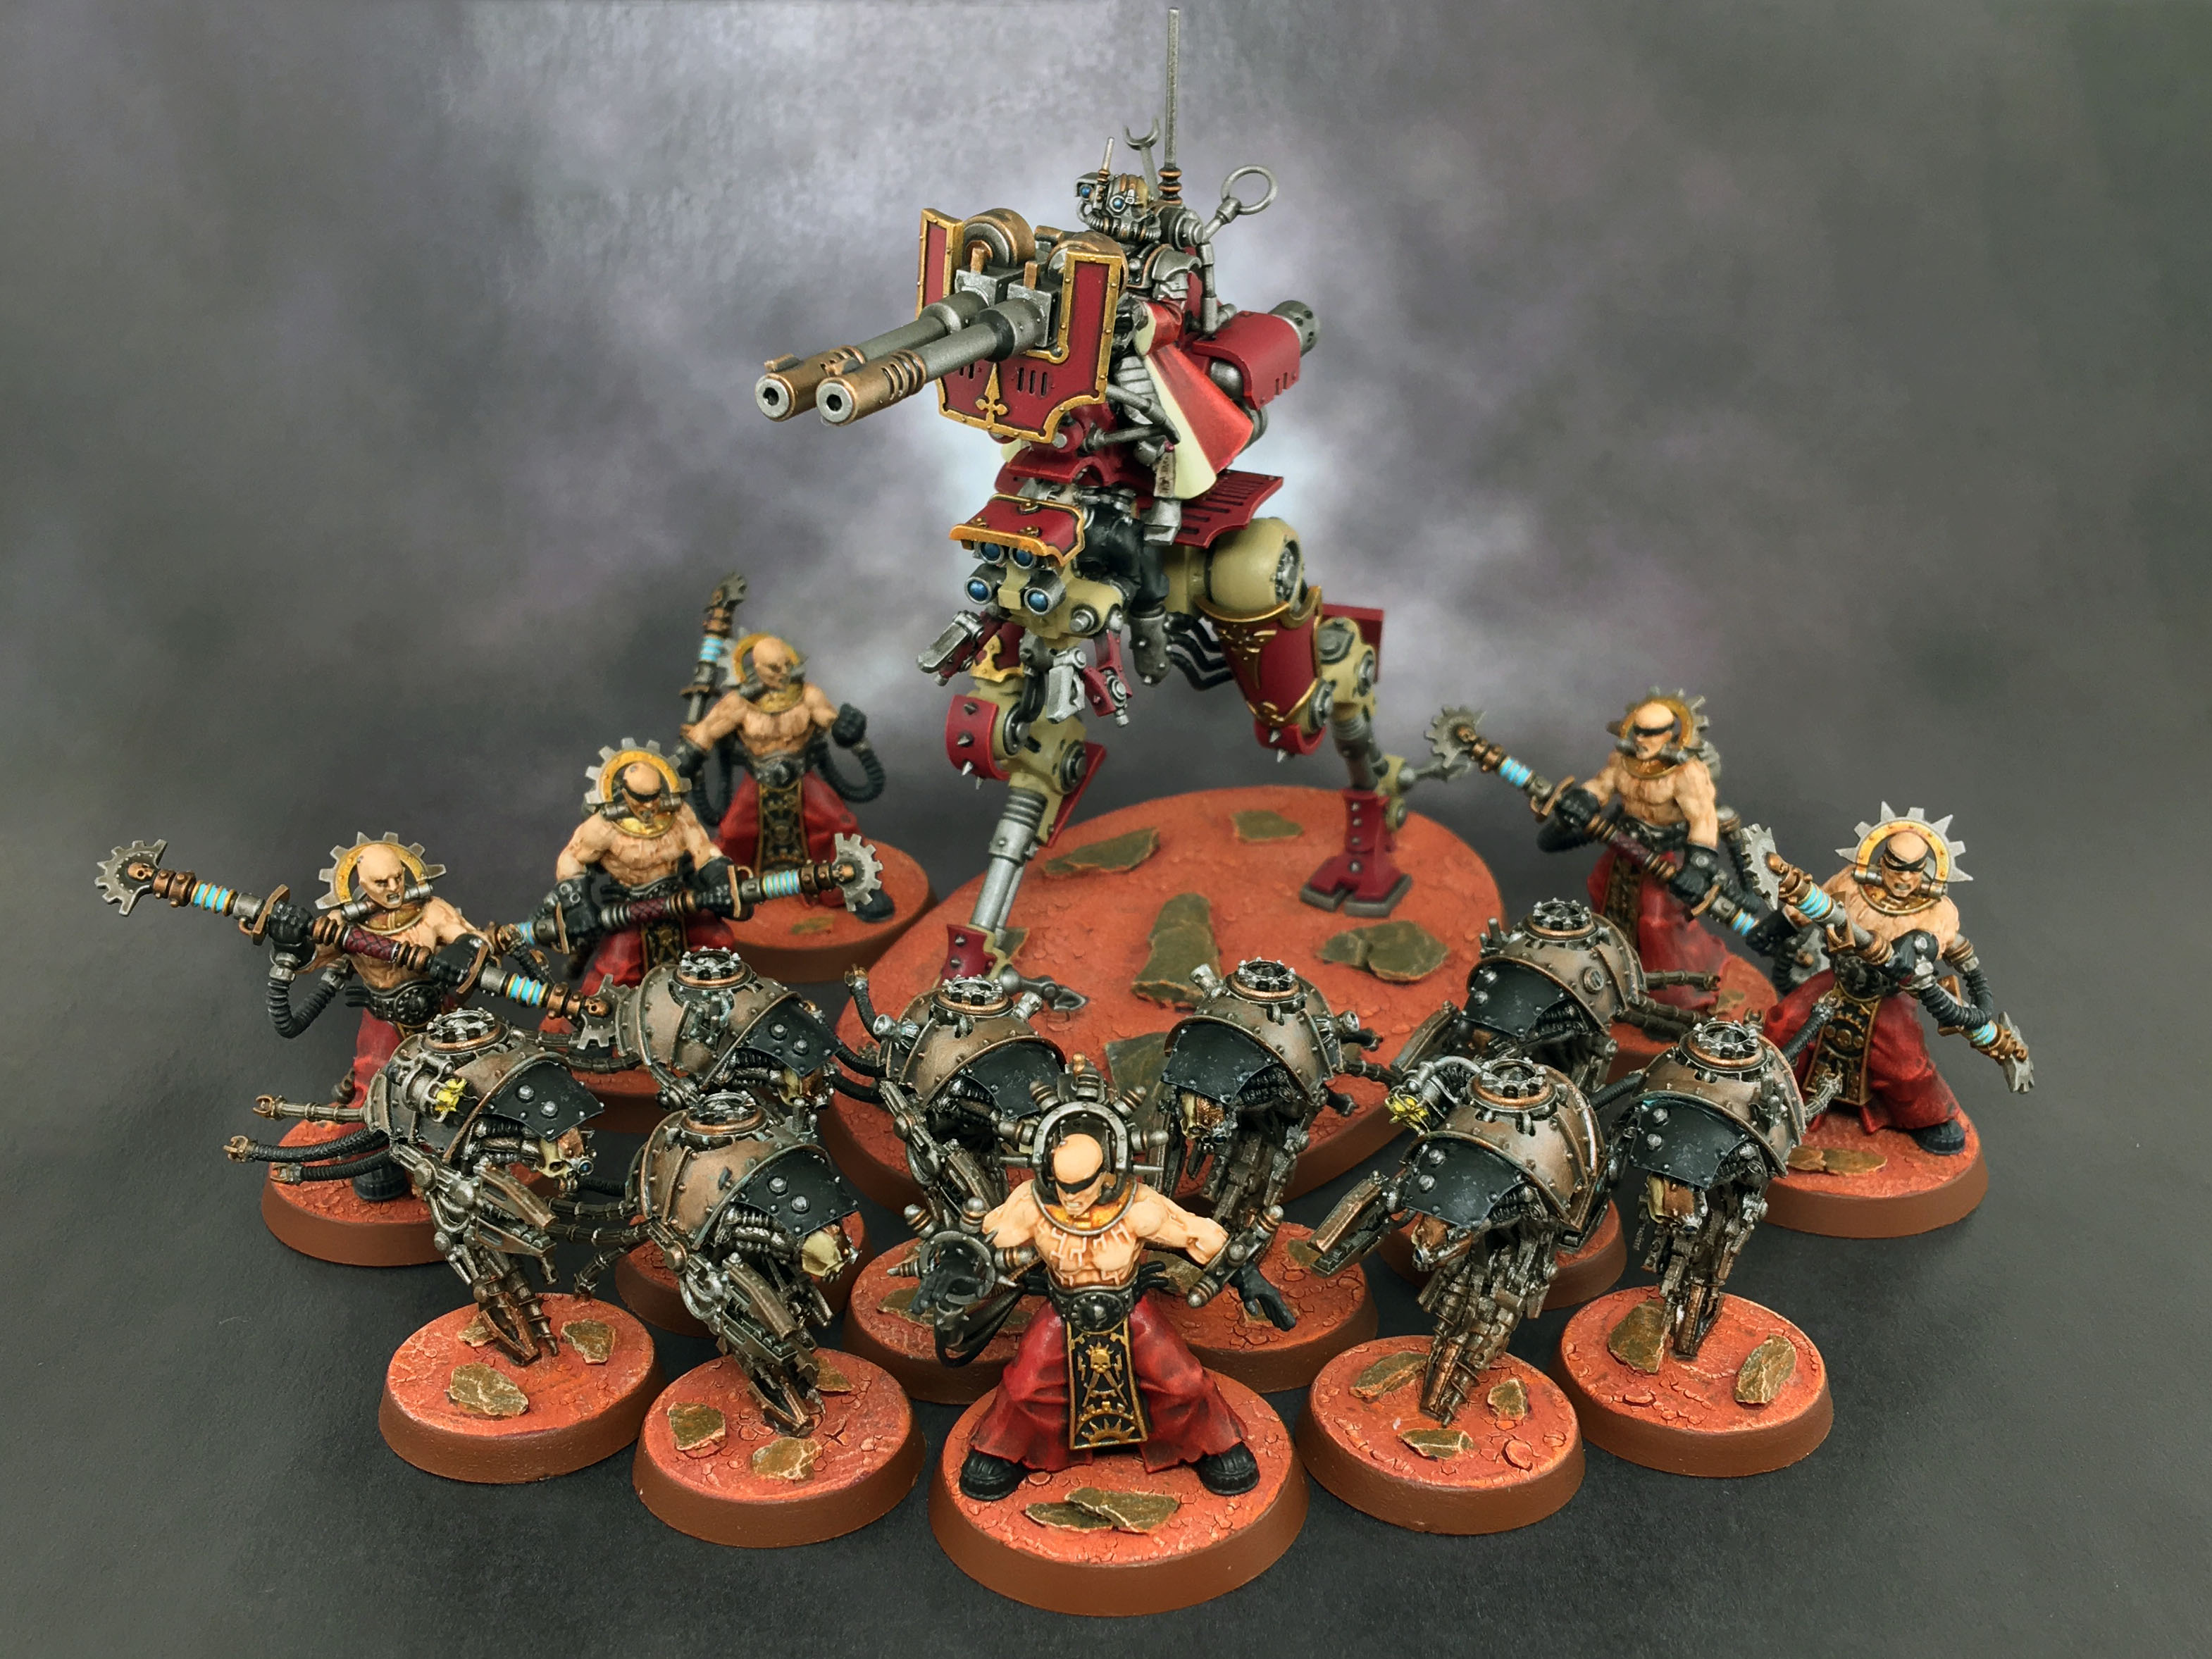 What's new - Warhammer 40K Adeptus Mechanicus and new edition news